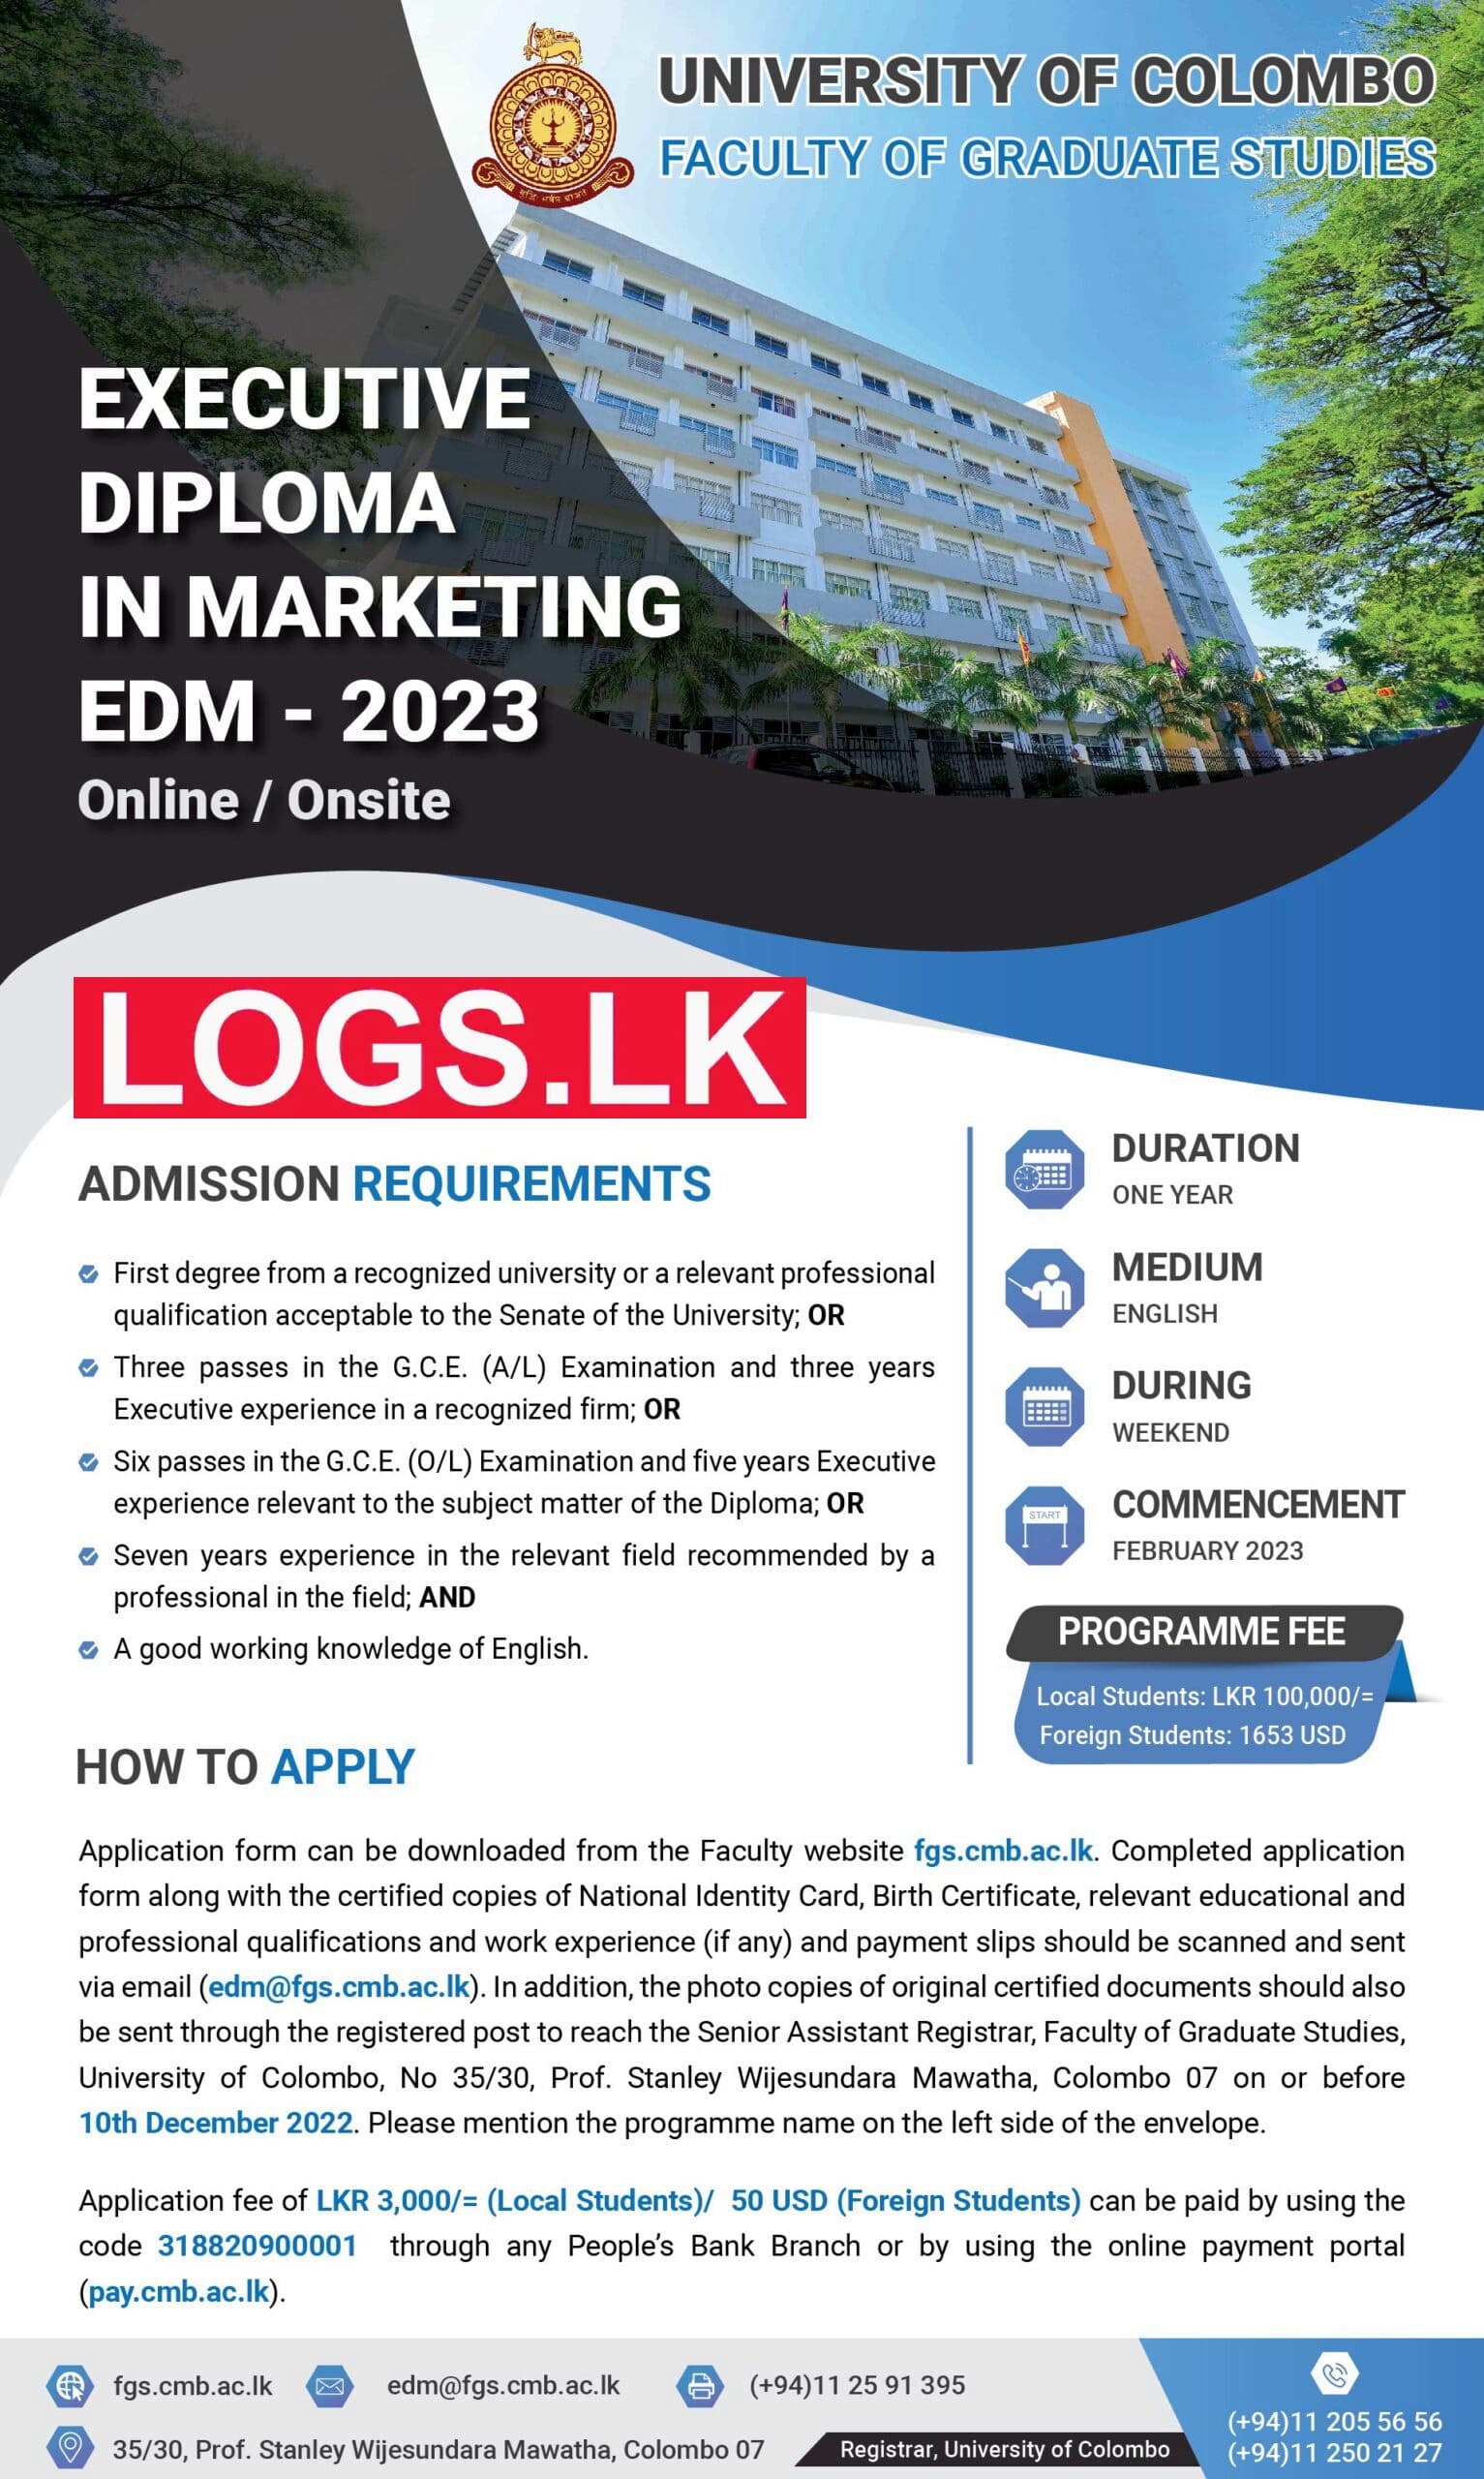 Executive Diploma in Marketing (EDM) - 2023 - Online / Onsite - University of Colombo Details, Application Form Download